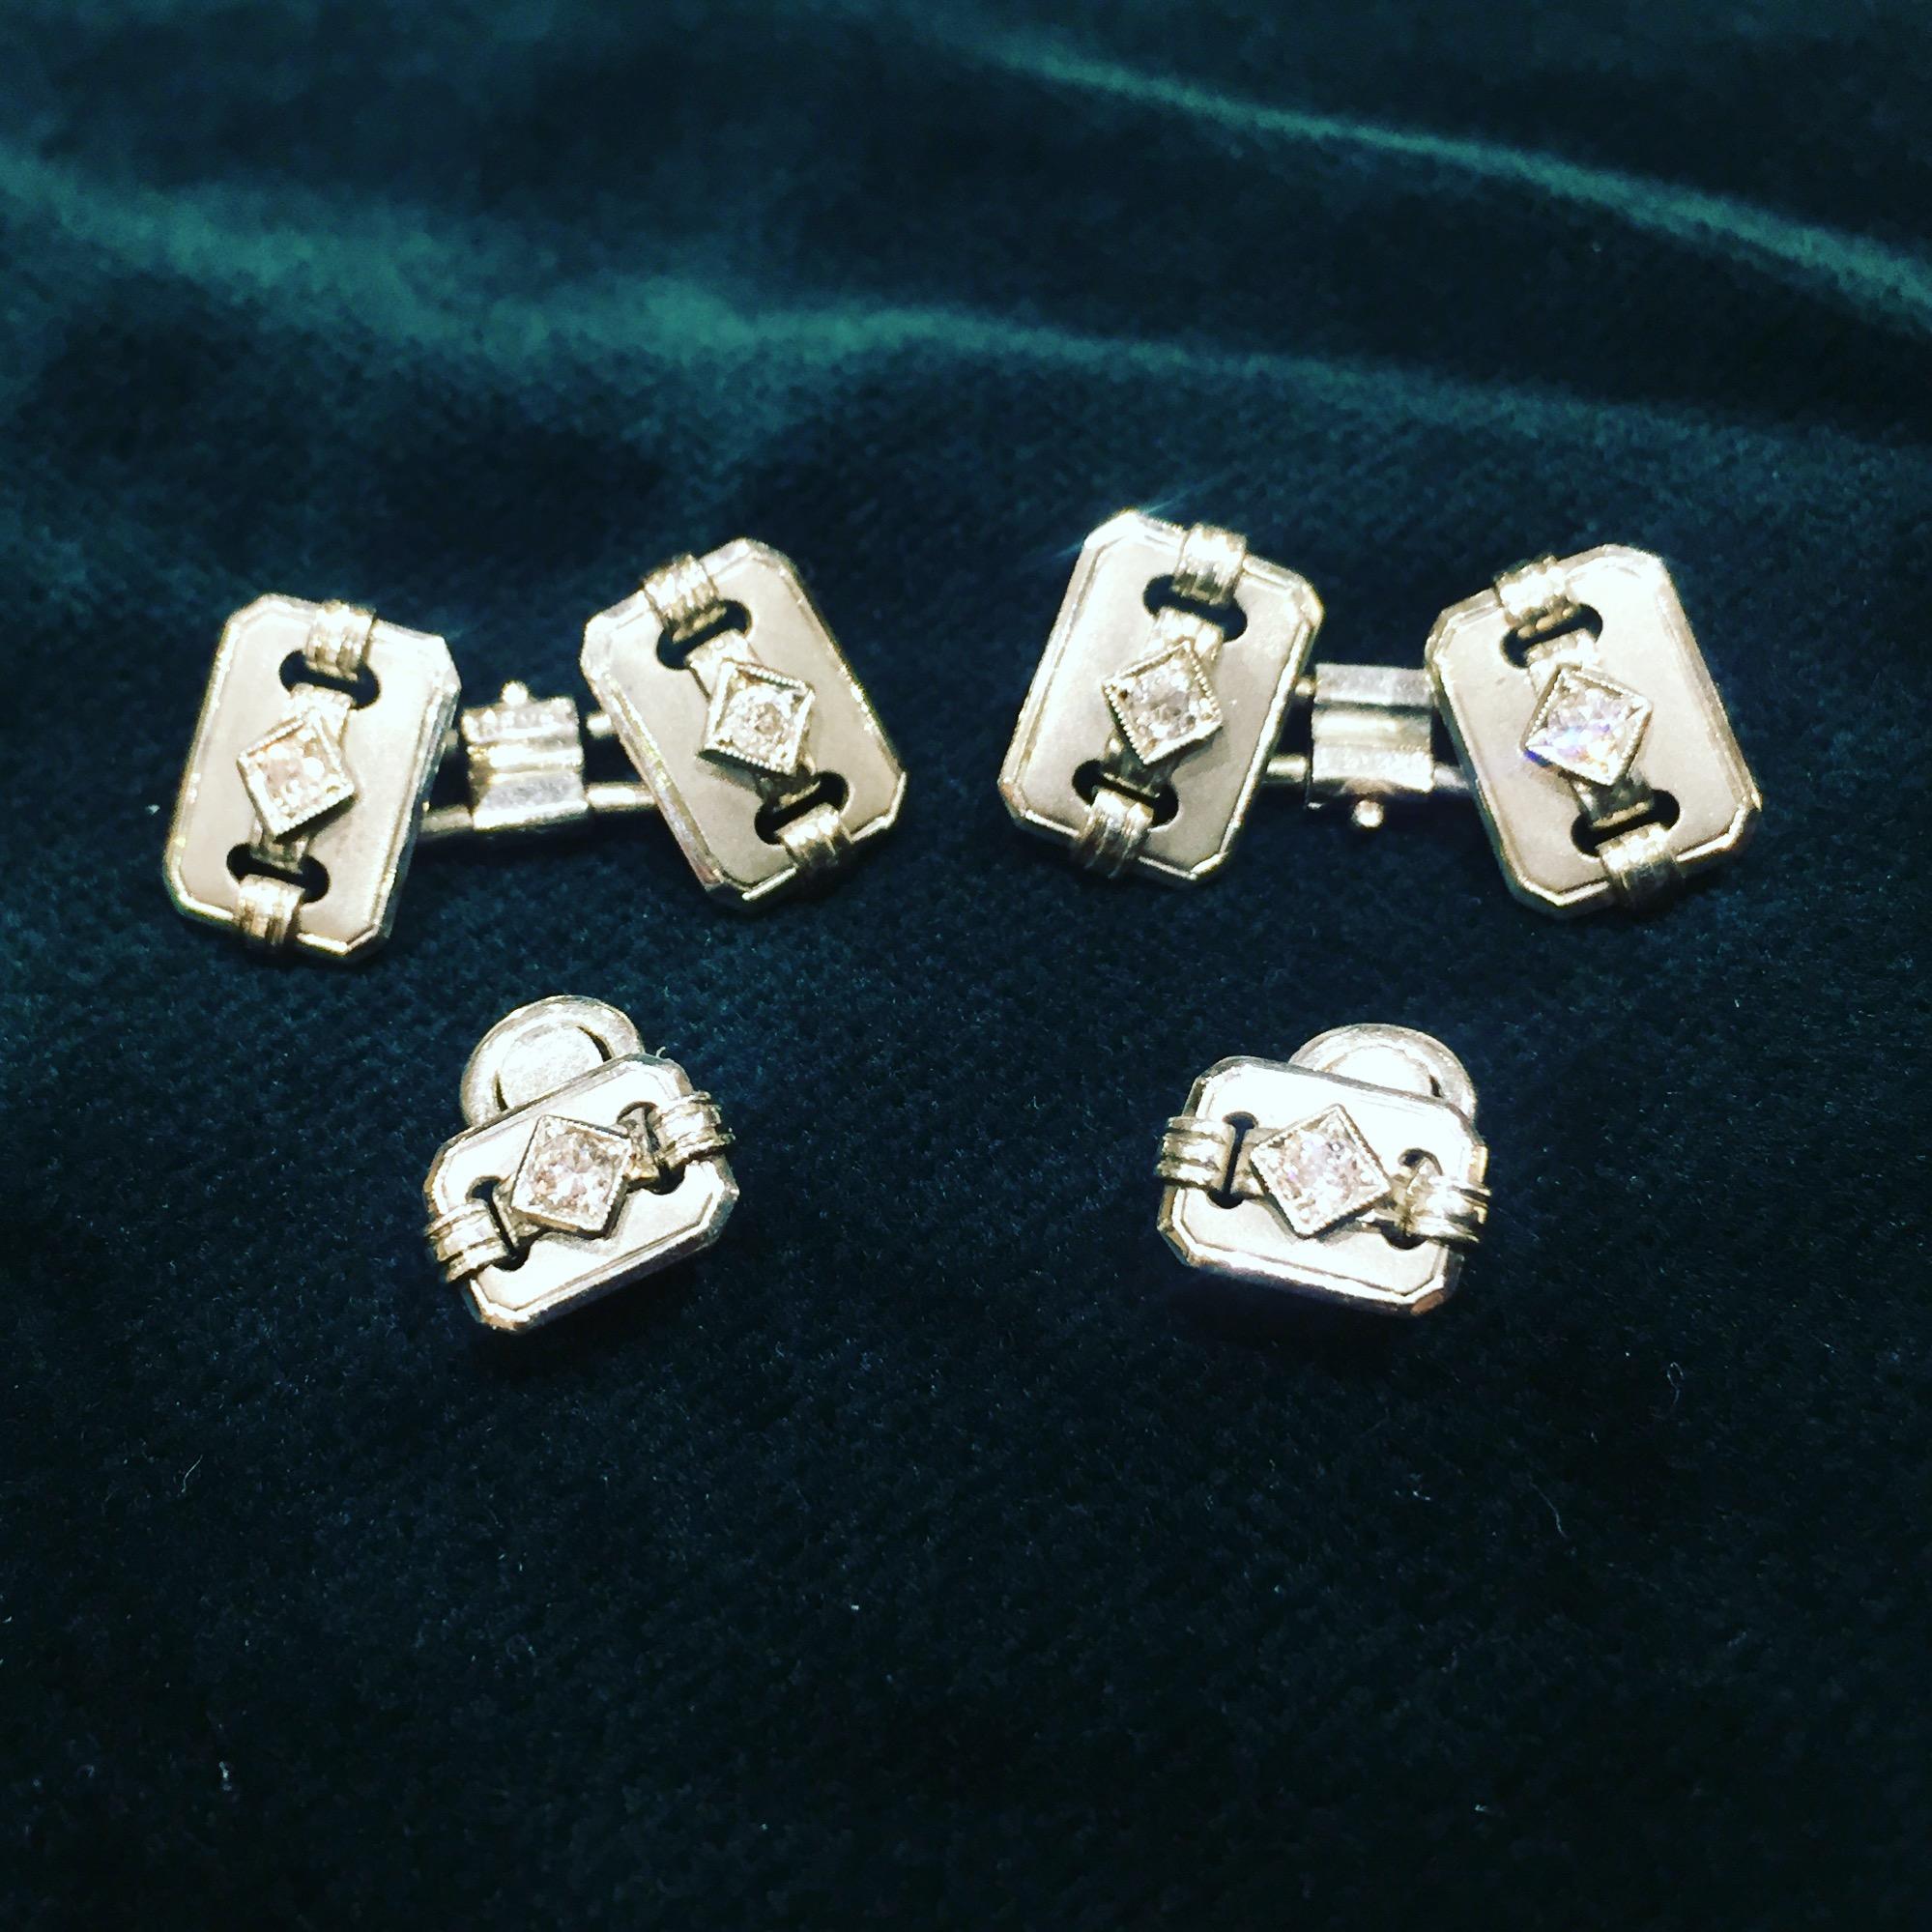 Deco cufflinks set with two buttons in white gold and diamonds, finely hand crafted from the beginning of the 20th Century. 